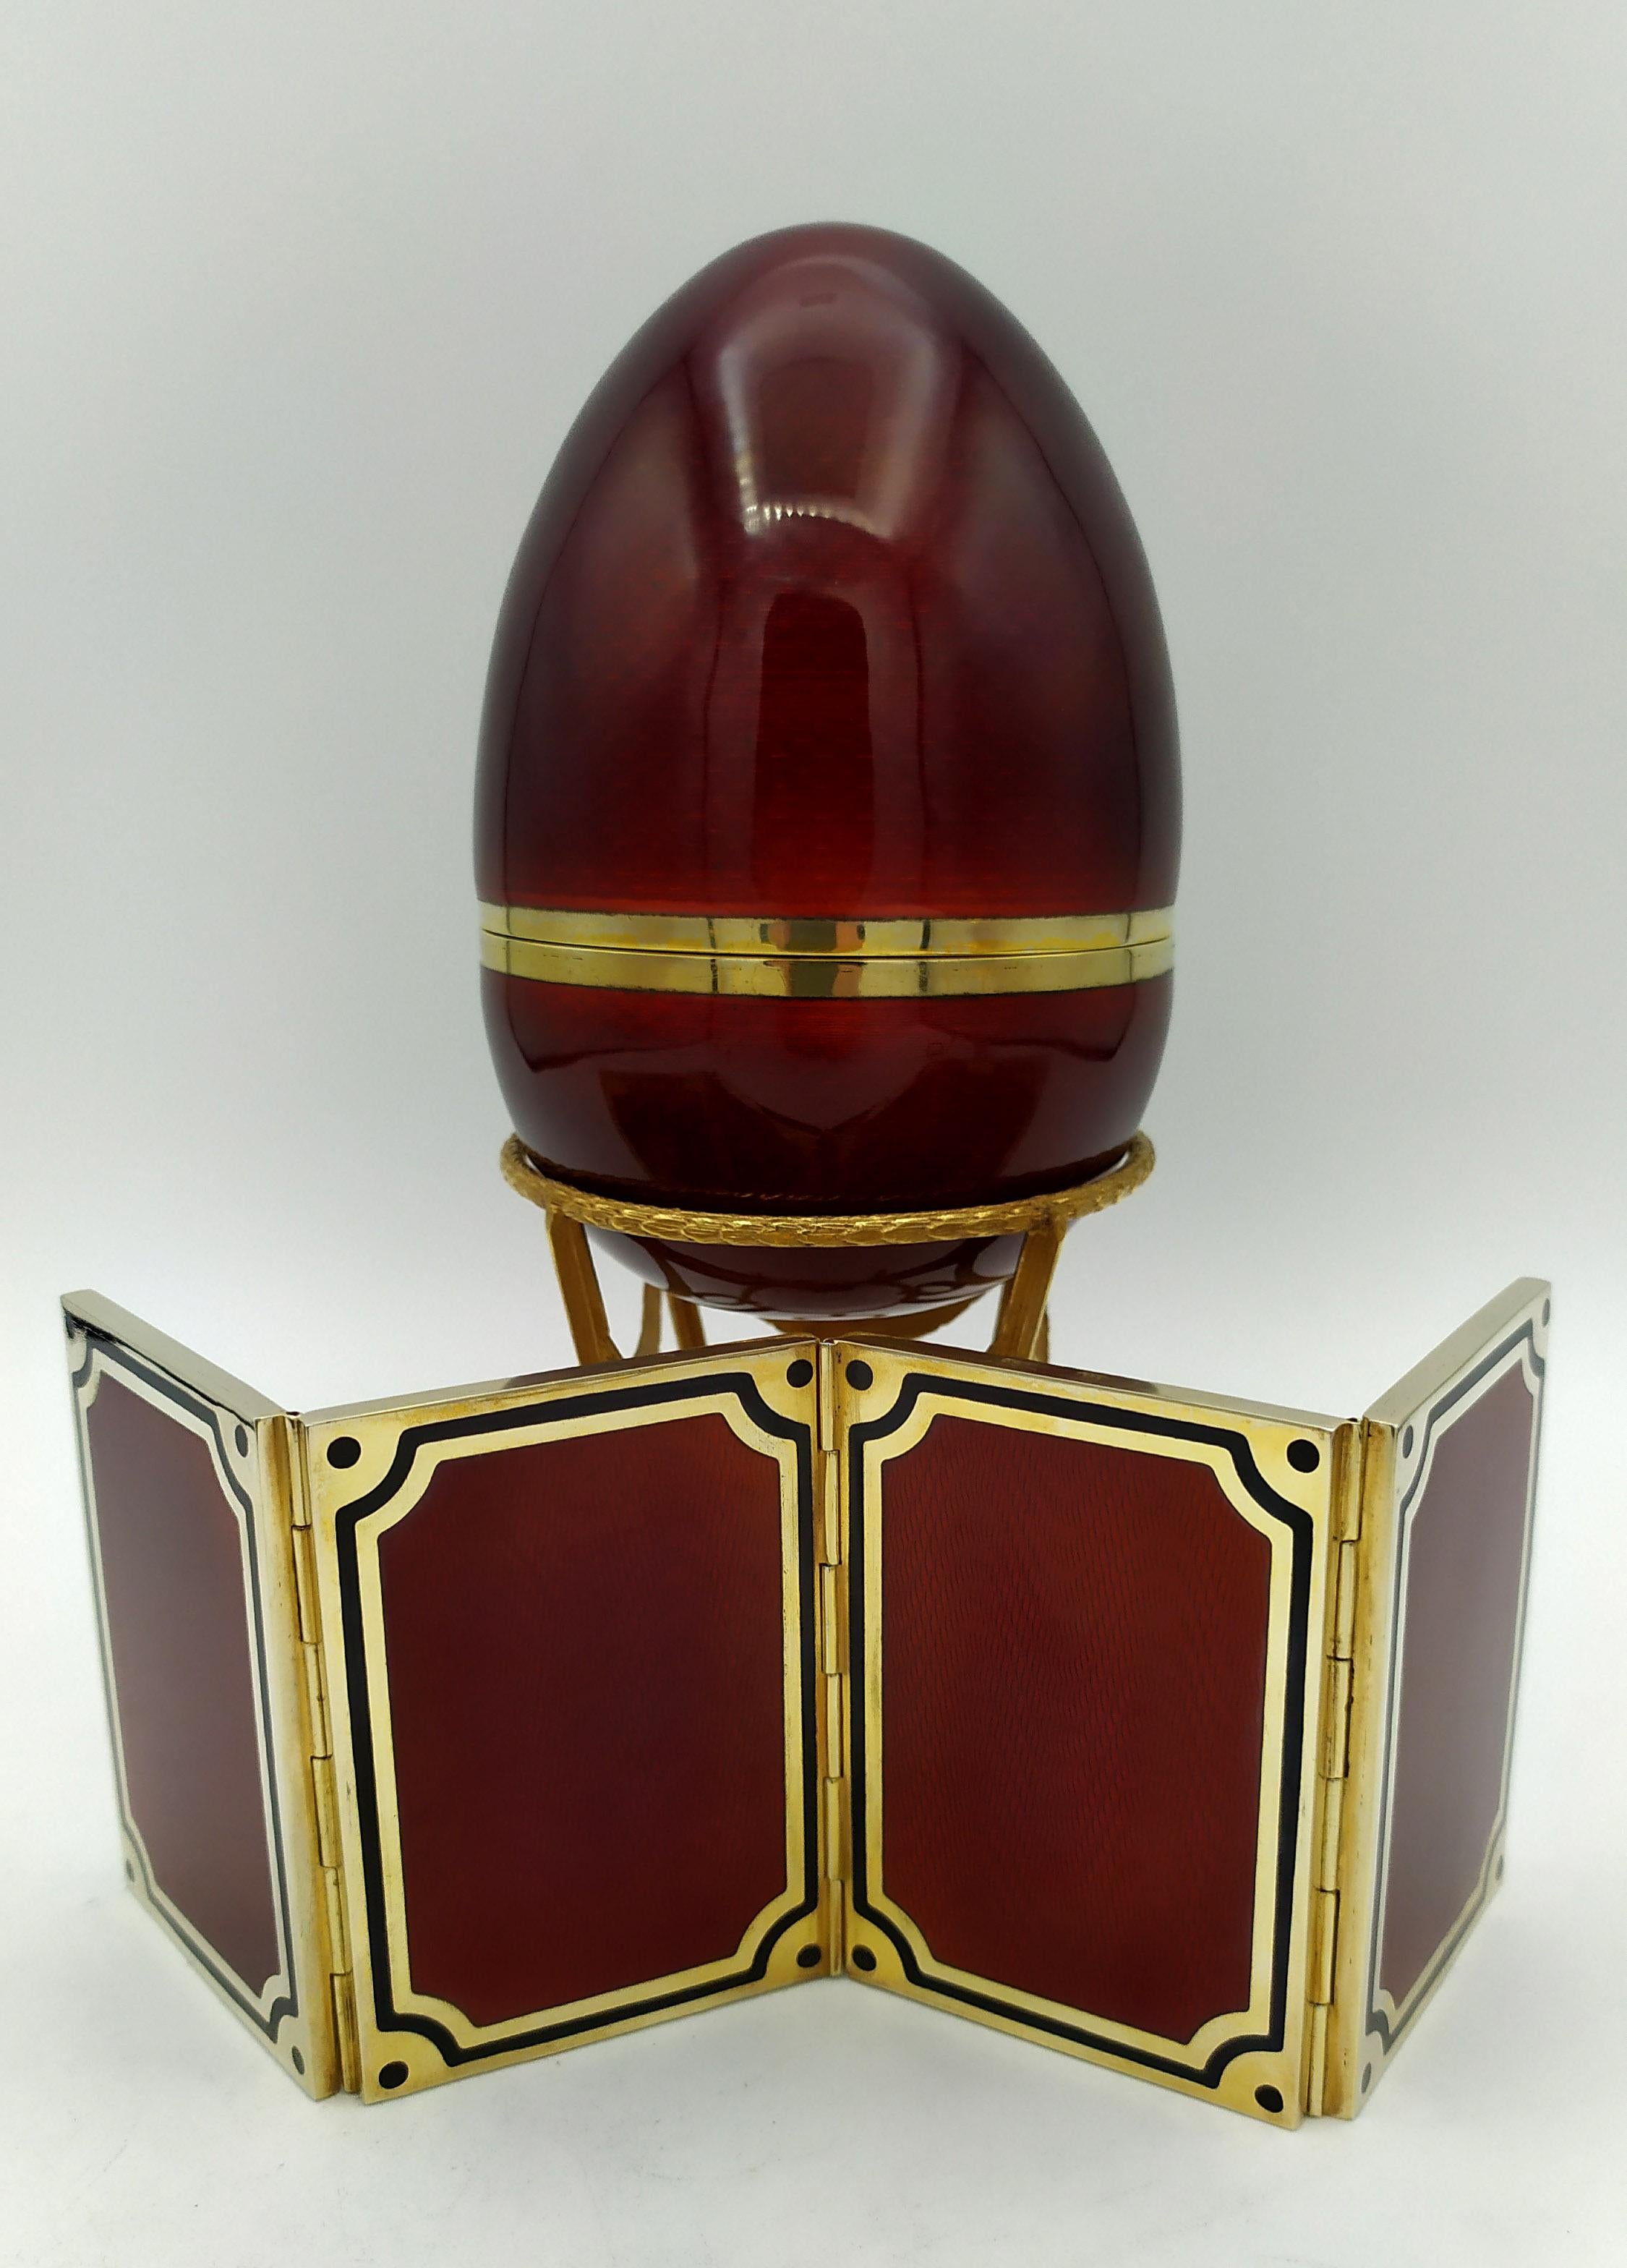 
Egg 4 Picture frames is in 925/1000 sterling silver.
Egg 4 Picture frames has fired enamels on guilloché has fired enamels on guilloché and design engraved by hand.
Egg 4 Picture frames is Russian Empire style inspired by Carl Fabergè eggs late